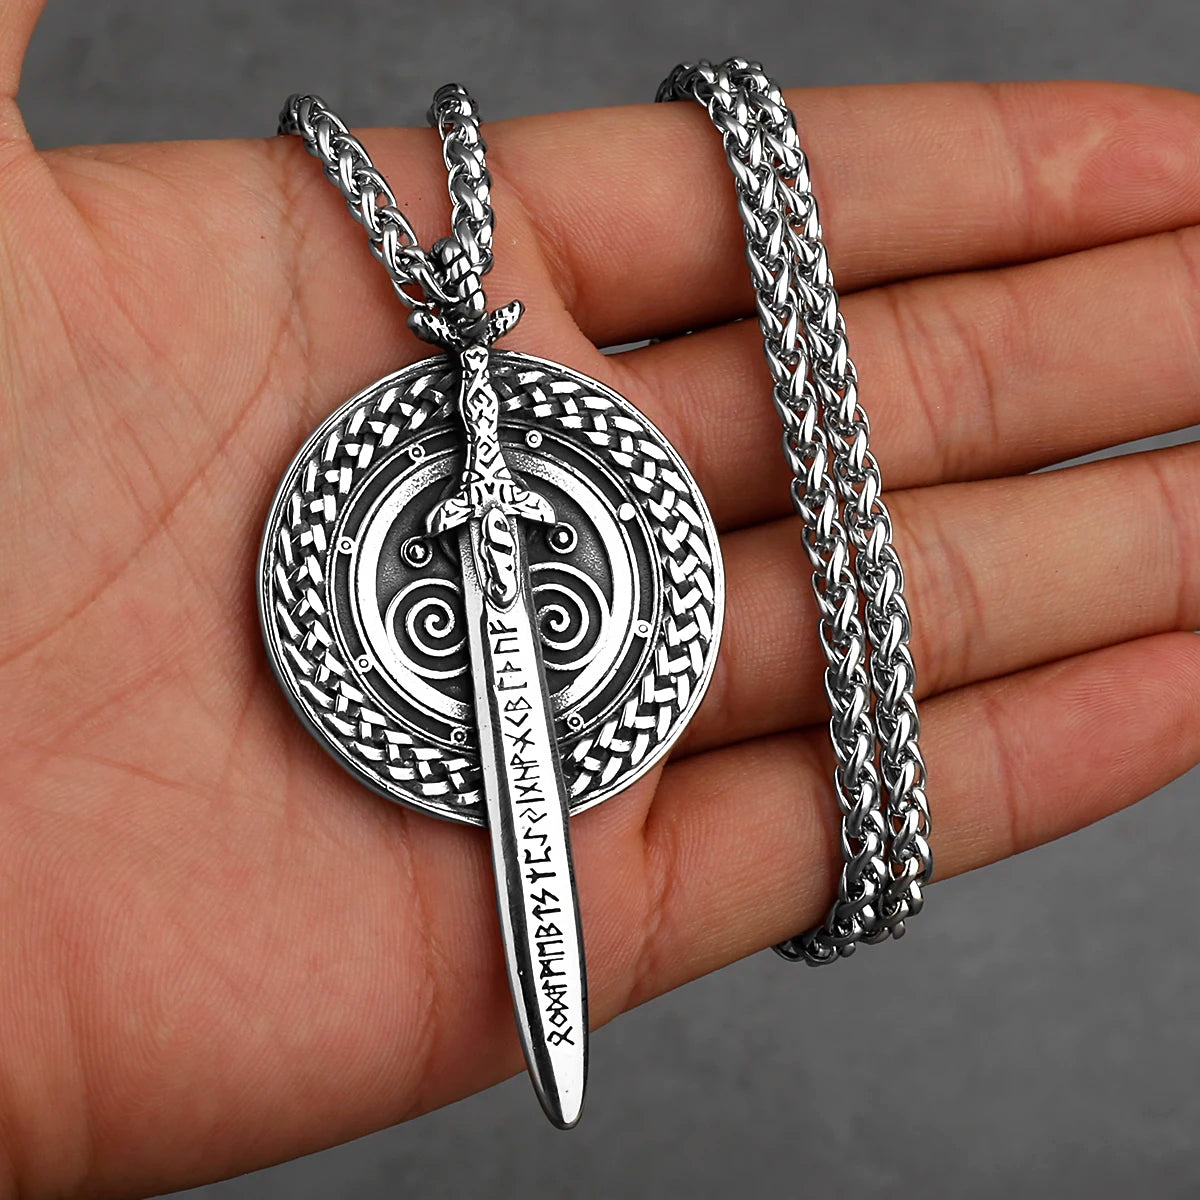 Viking Axe Necklace Pendant - Mythical Pieces Only Pendant / WJ 122